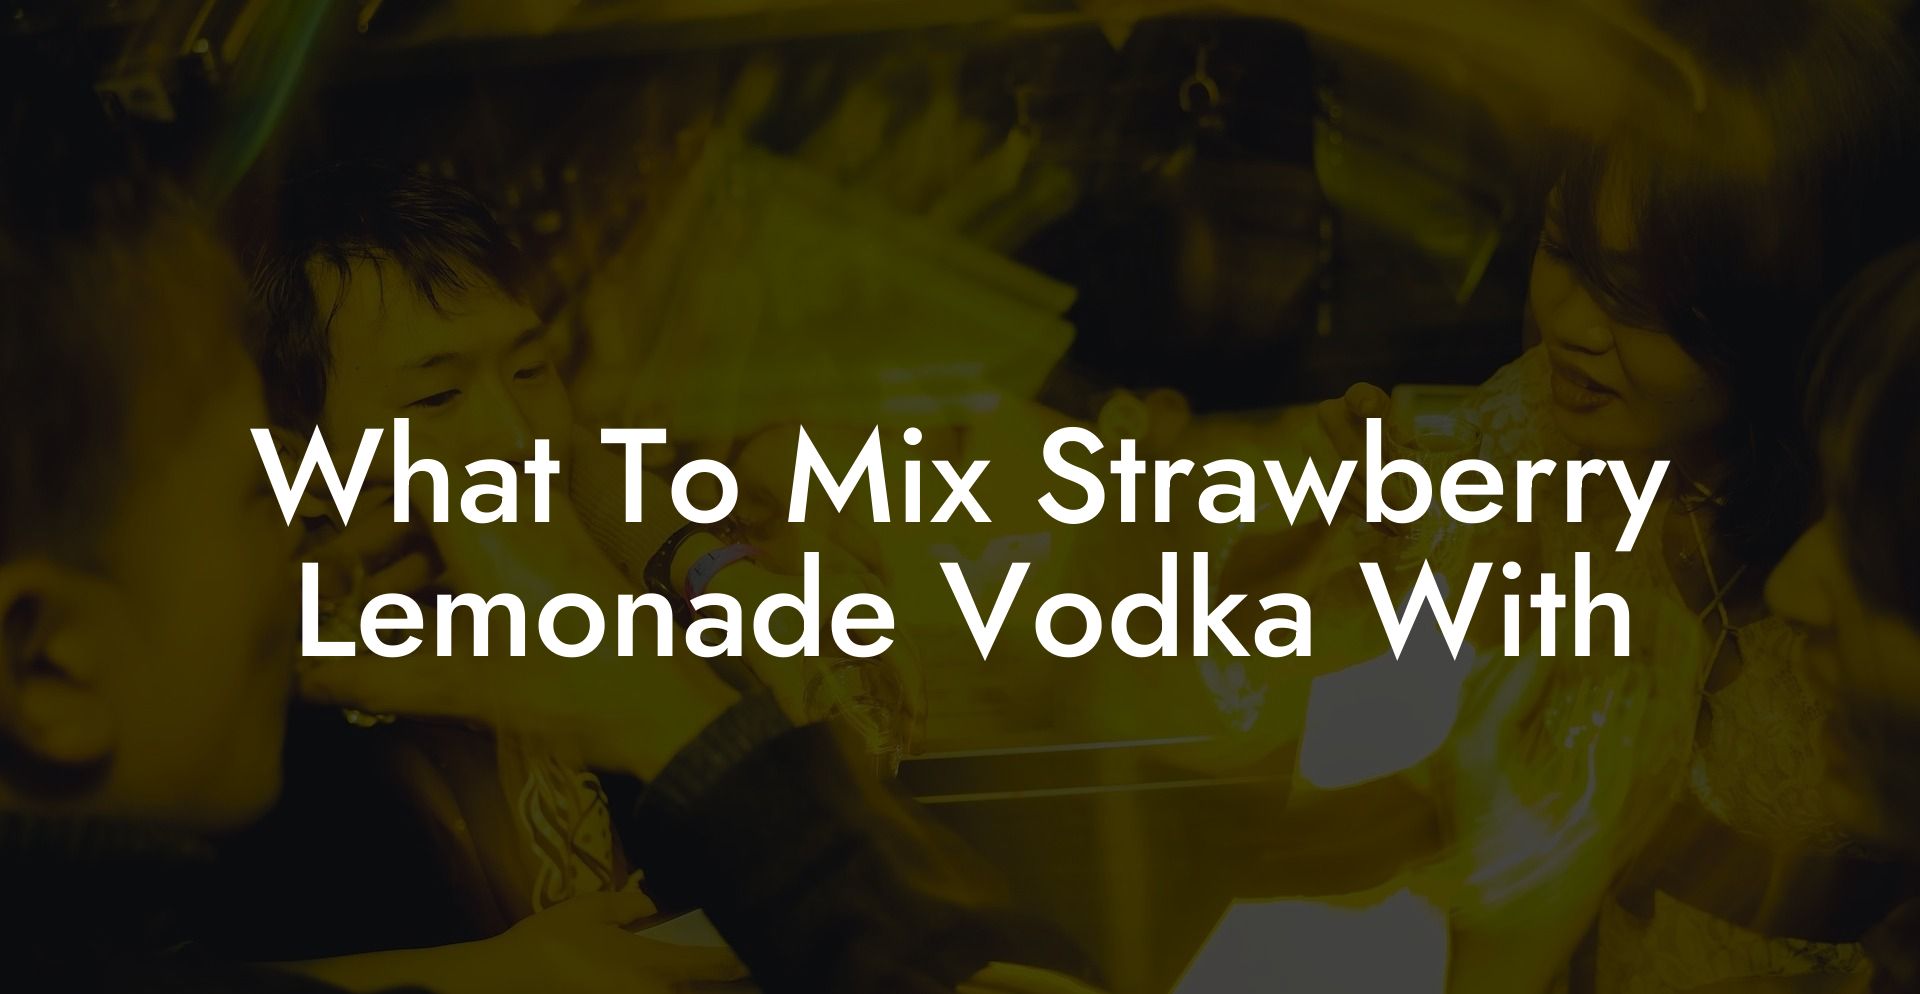 What To Mix Strawberry Lemonade Vodka With